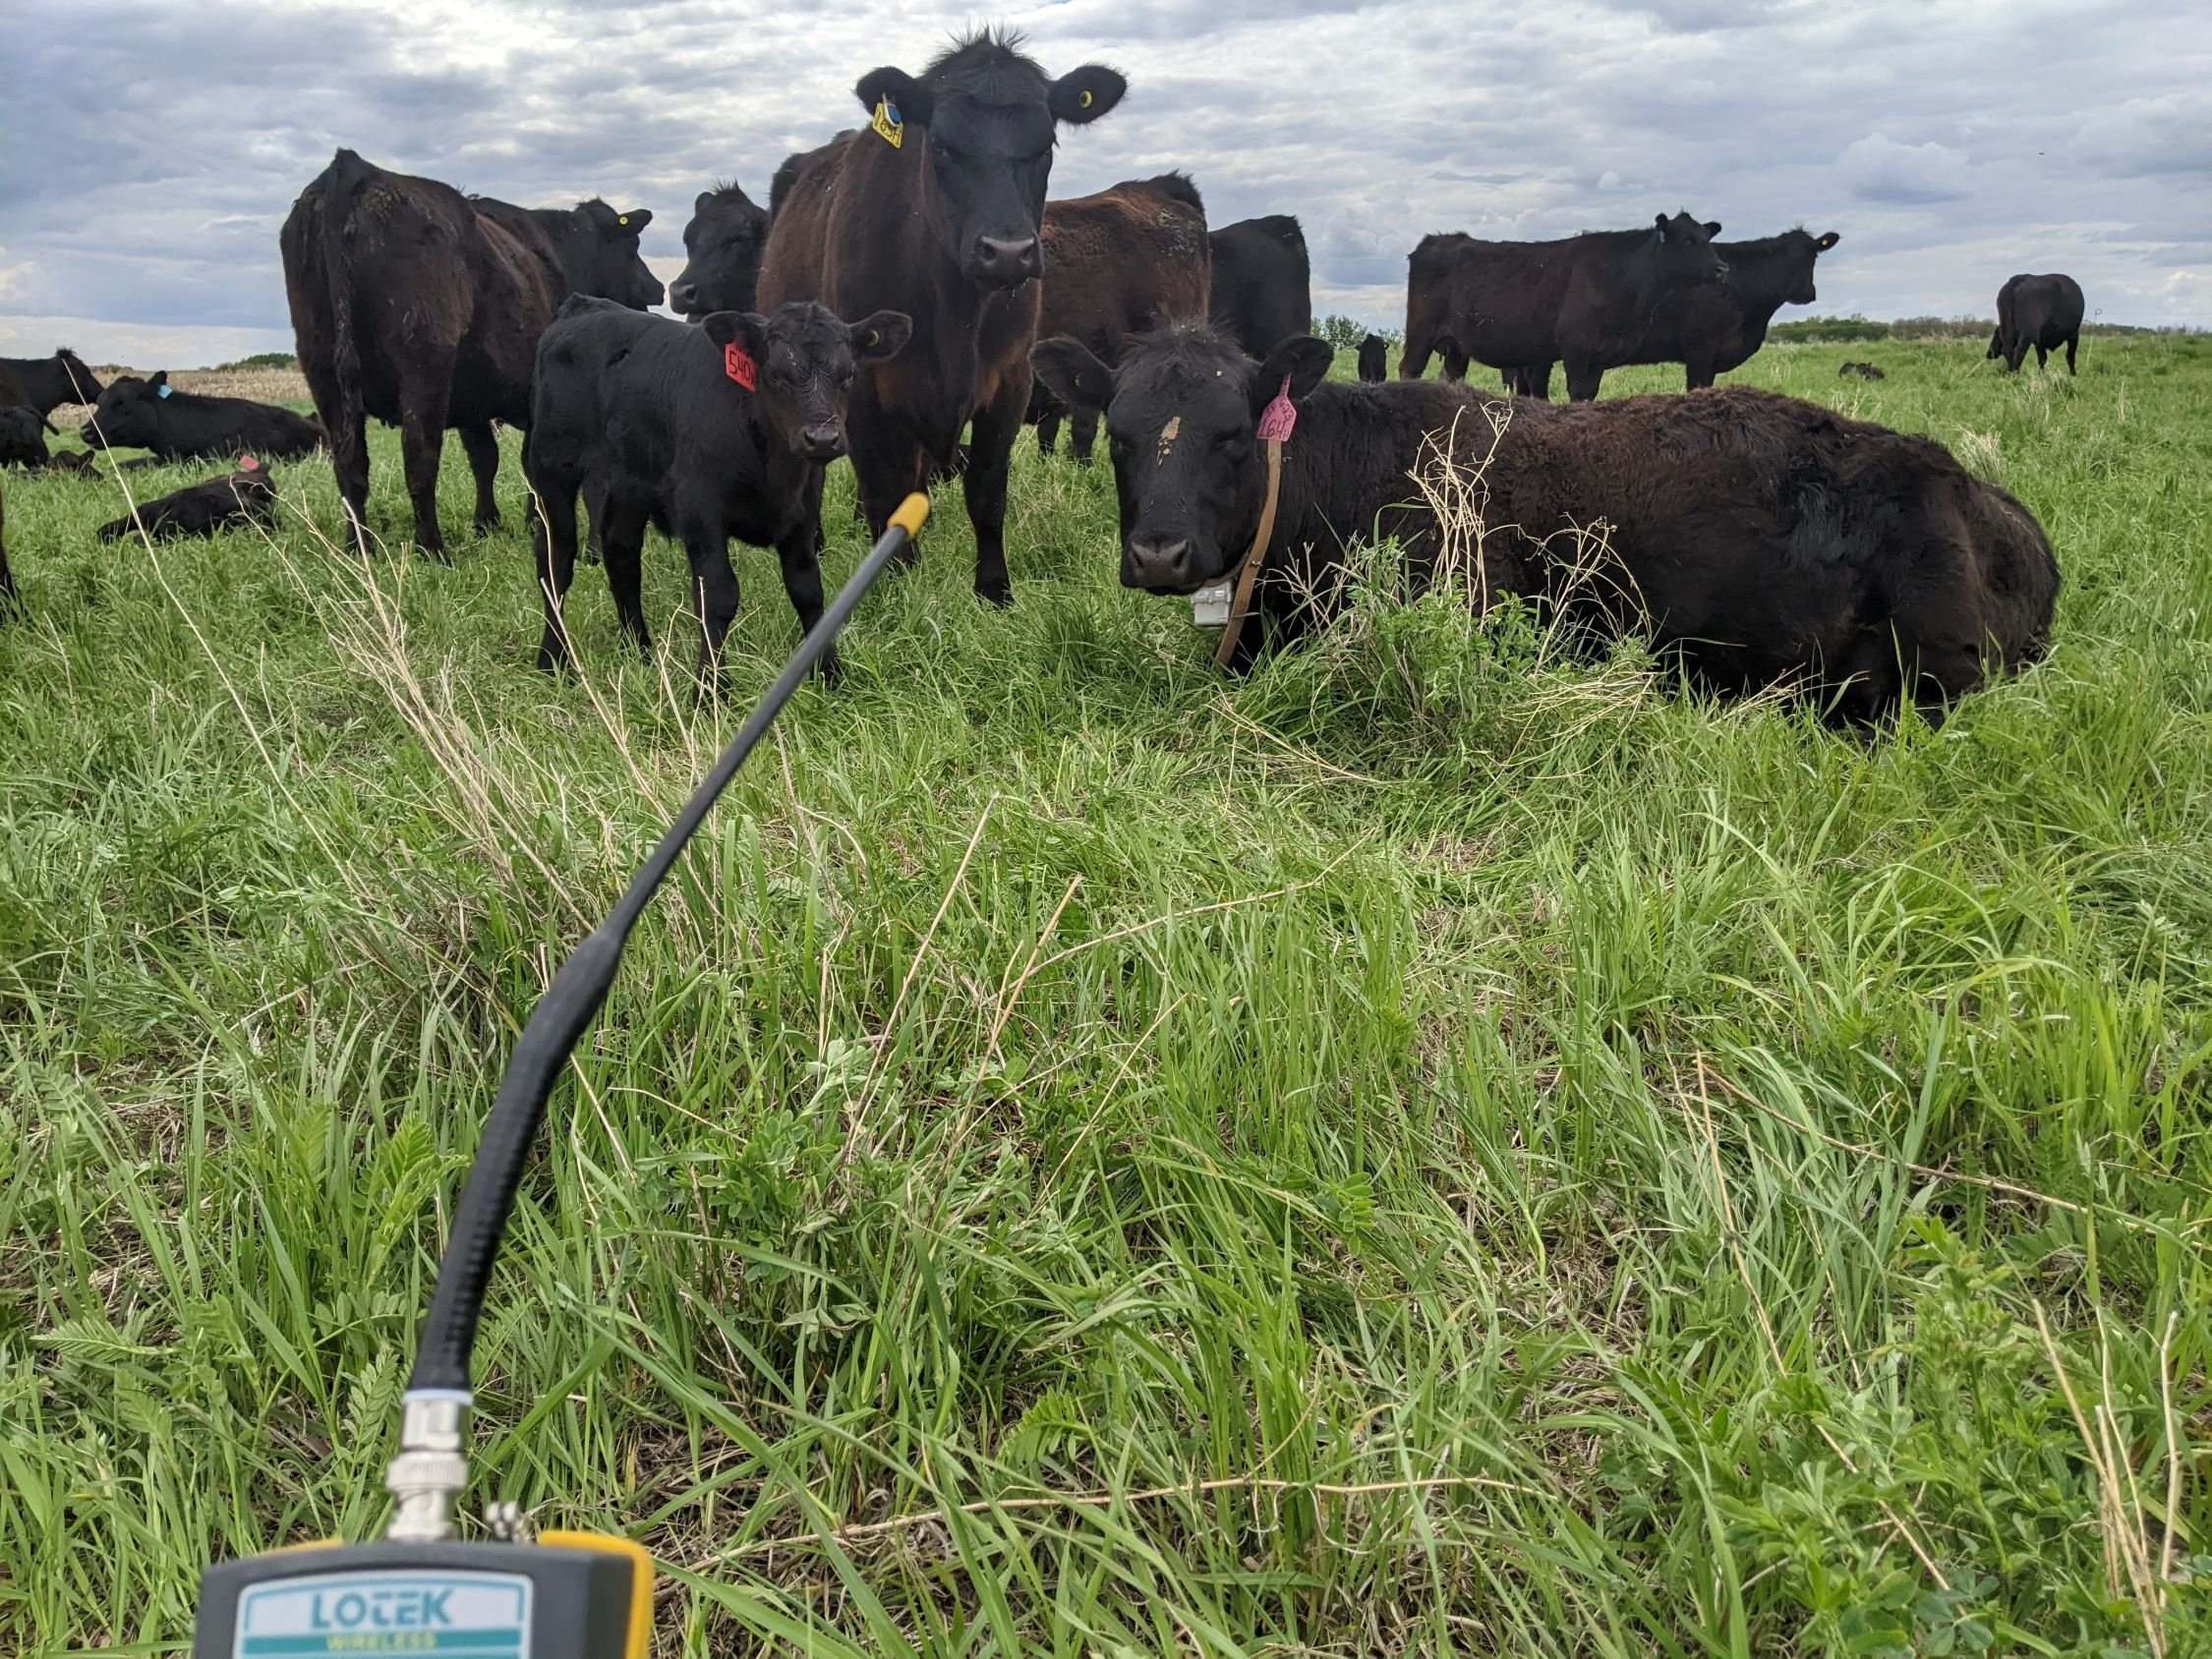 Downloading information from a GPS collar to monitor where the herd has moved in the pasture